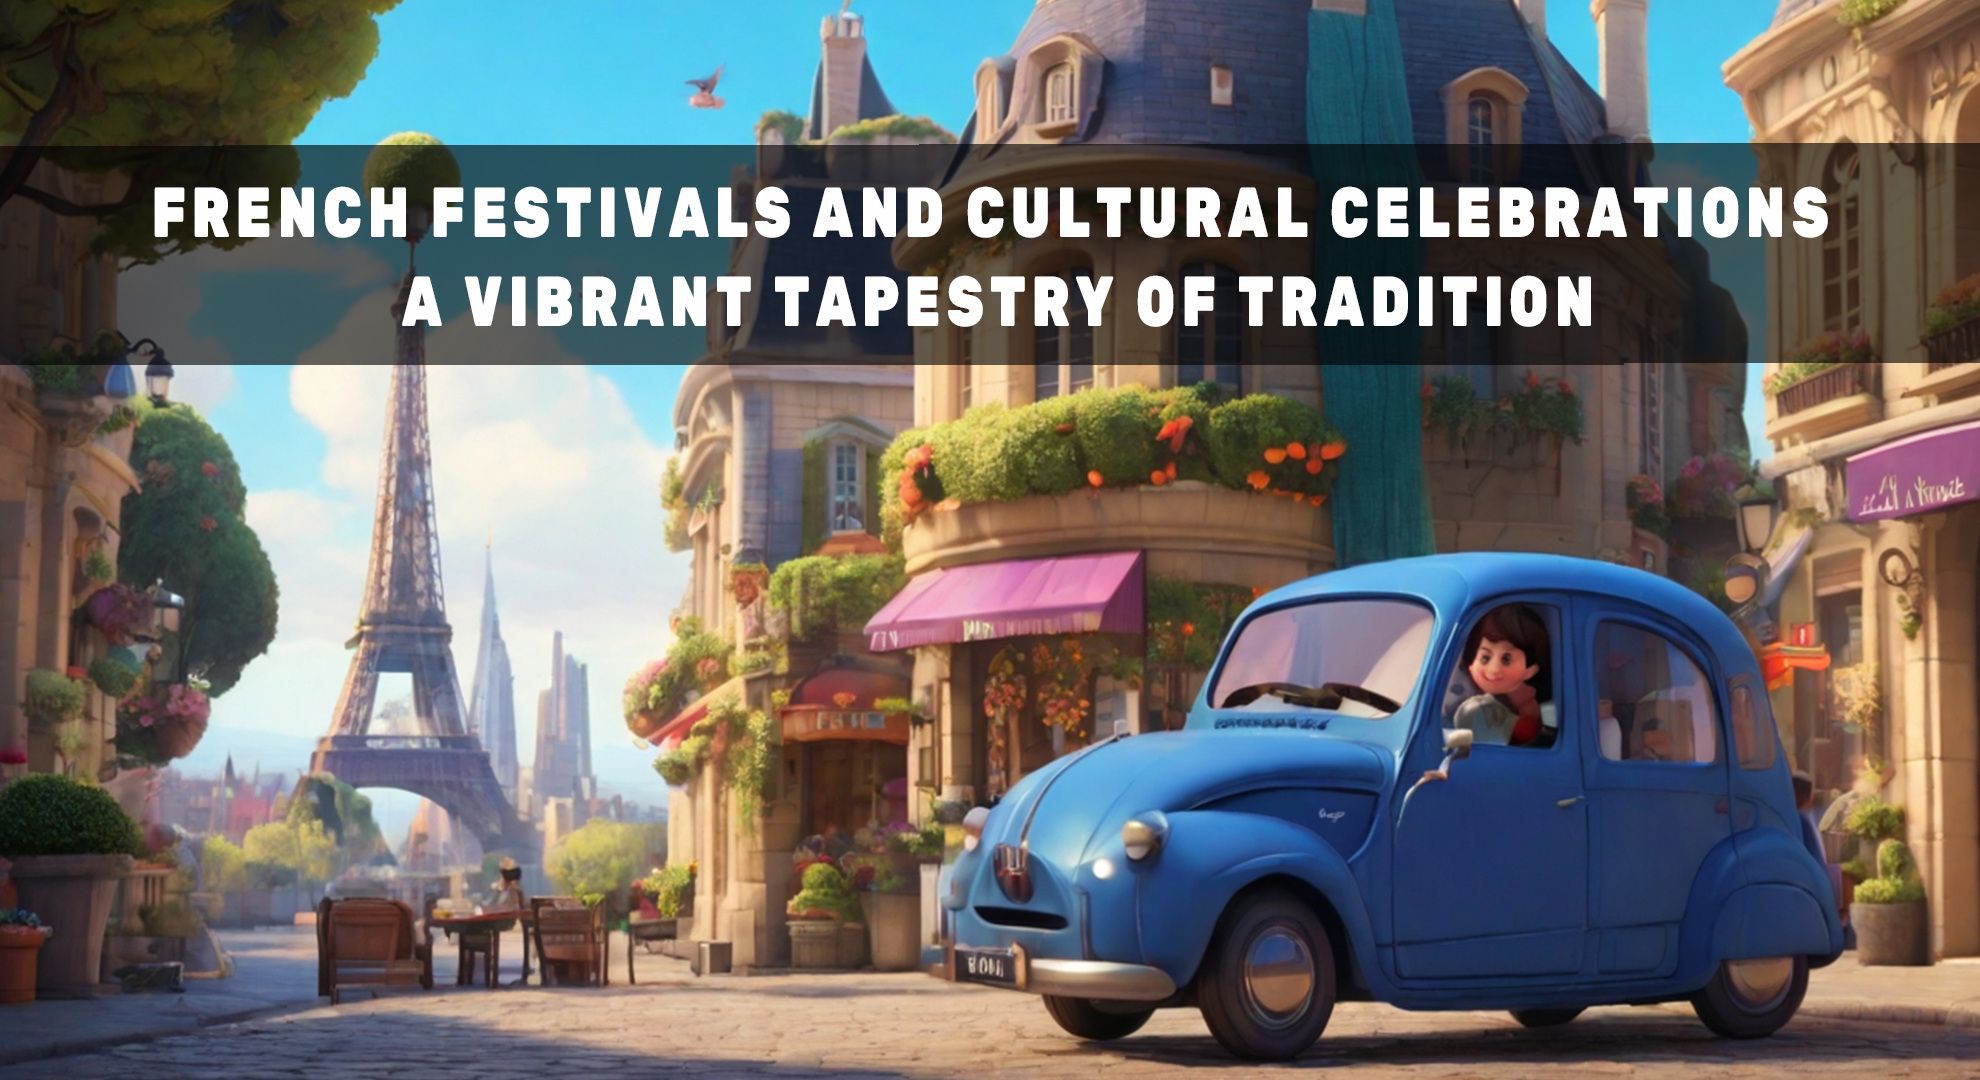 French Festivals and Cultural Celebrations: A Vibrant Tapestry of Tradition